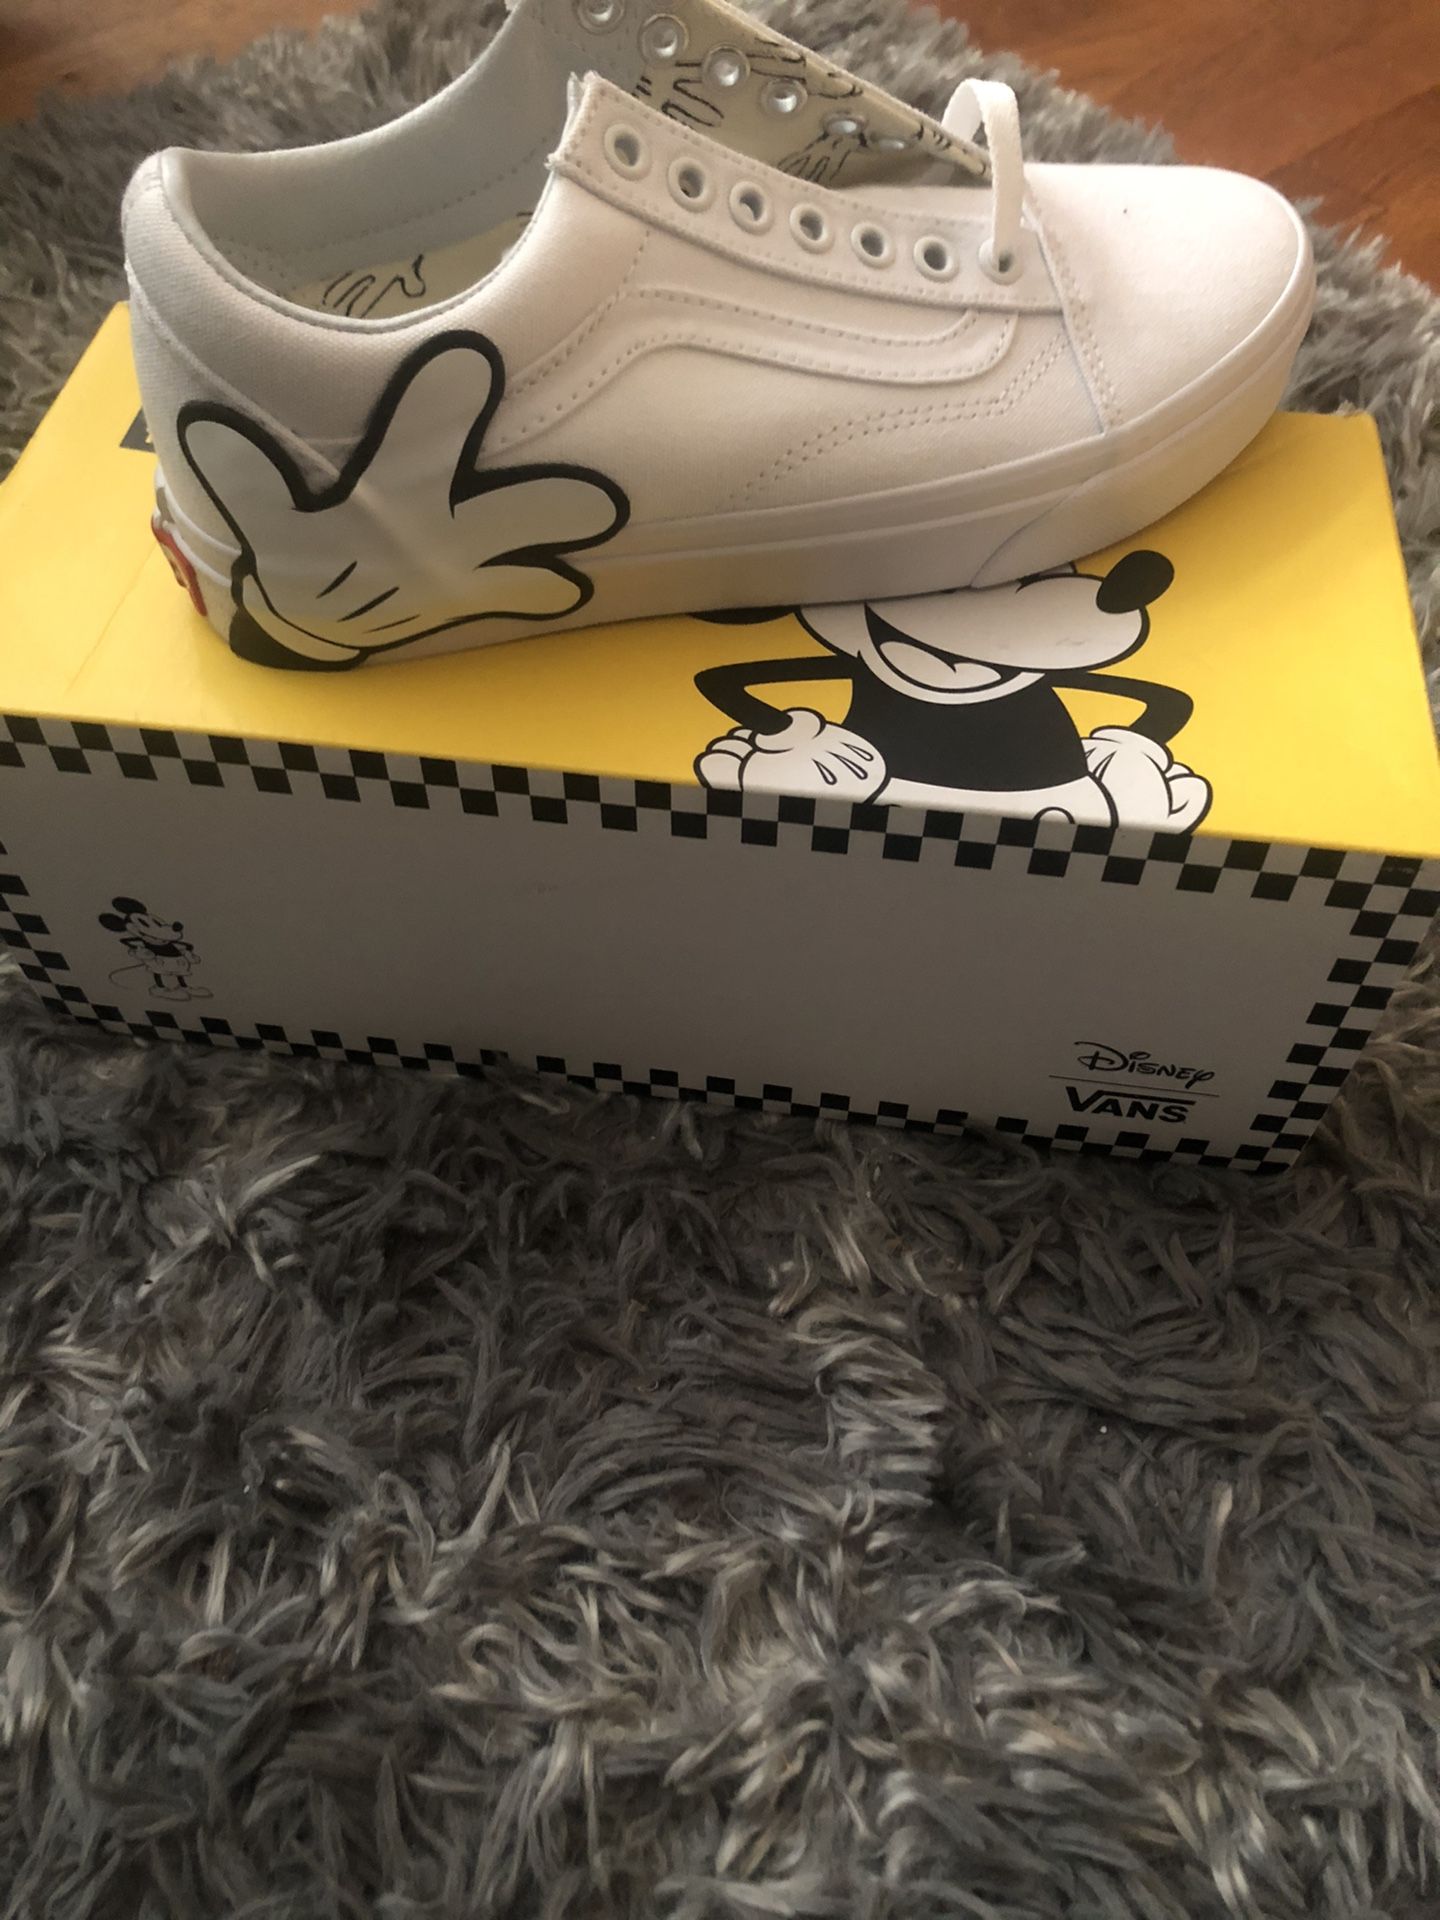 Vans Mickey Mouse Shoes